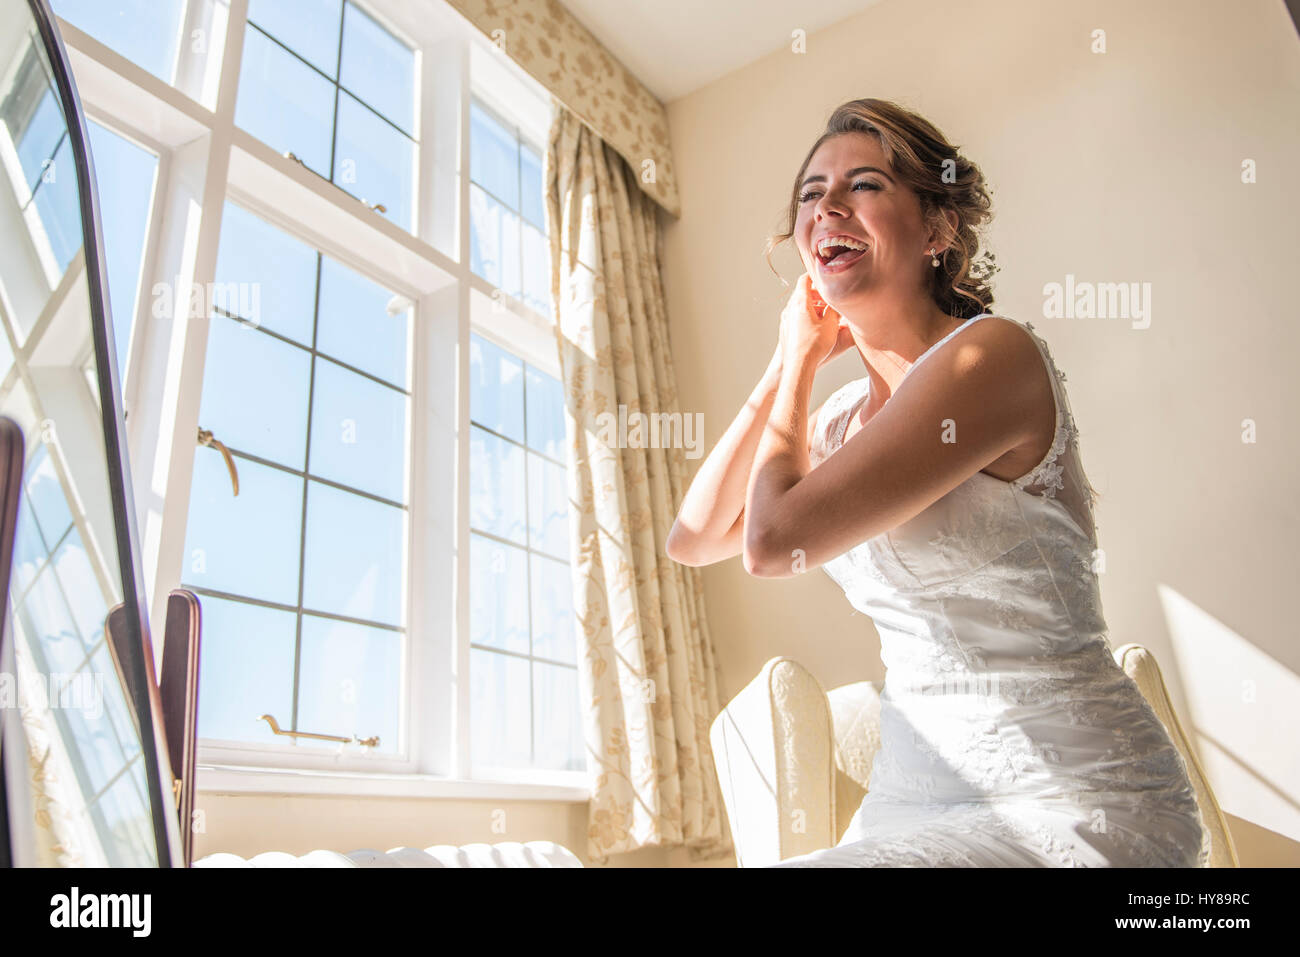 A bride getting ready in her bridal suite prior to her wedding Stock Photo